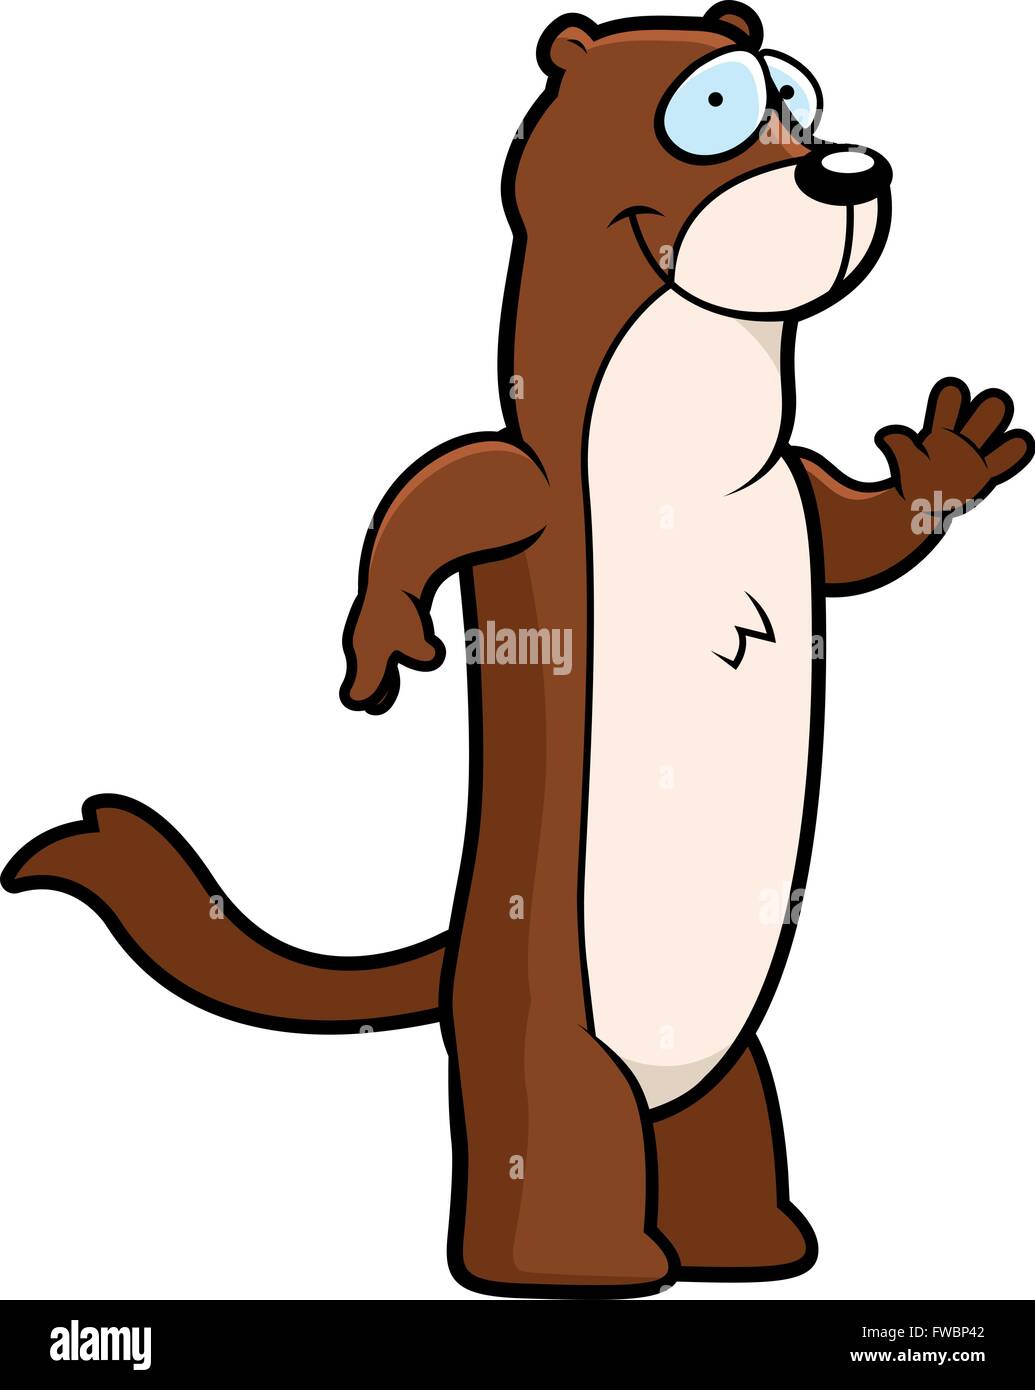 A happy cartoon weasel waving and smiling. Stock Vector